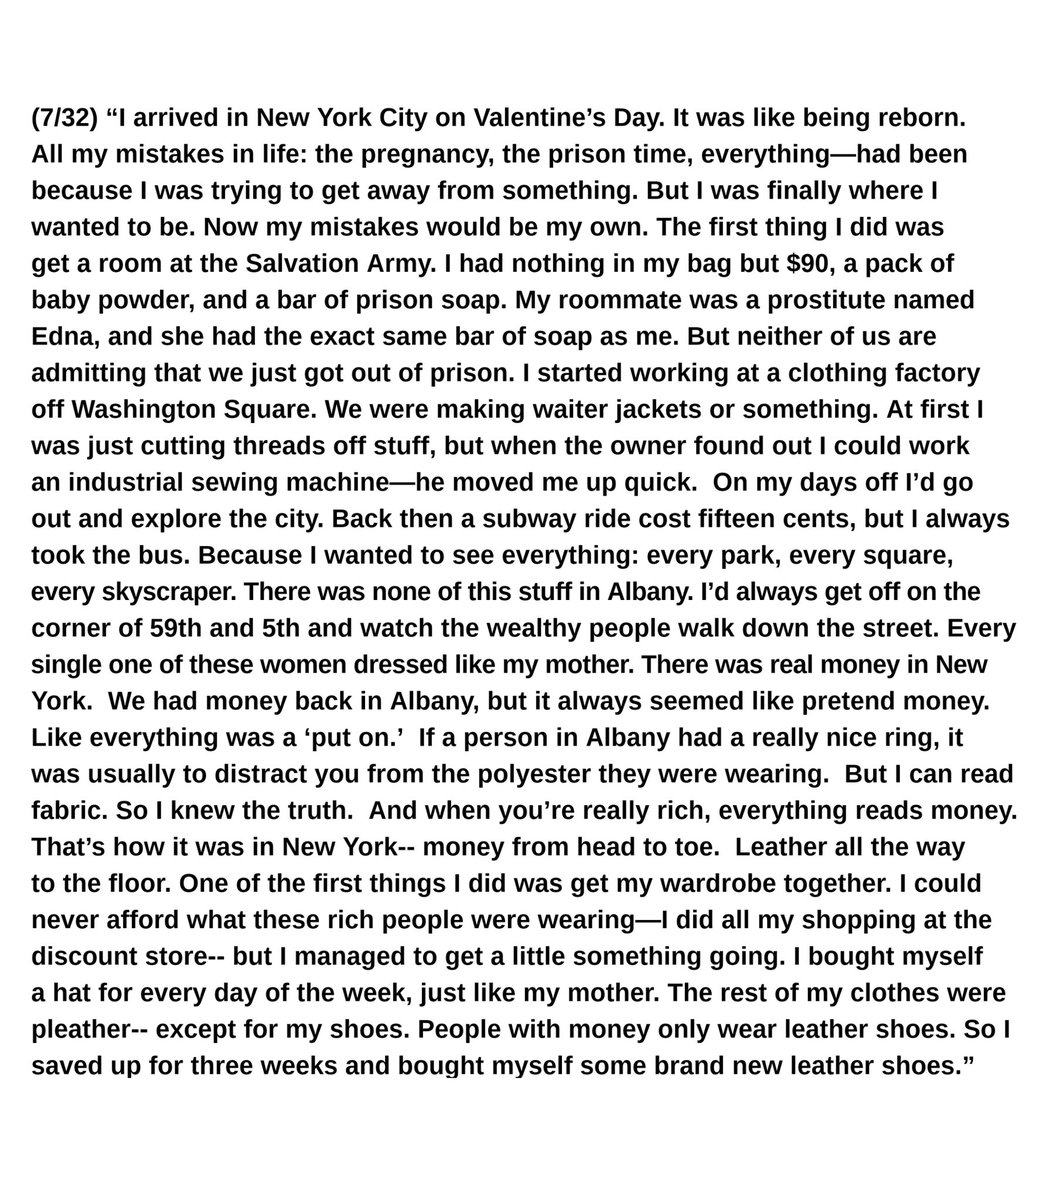 (7/32) “I arrived in New York City on Valentine’s Day. It was like being reborn. All my mistakes in life: the pregnancy, the prison time, everything—had been because I was trying to get away from something..." #TattletalesfromTanqueray